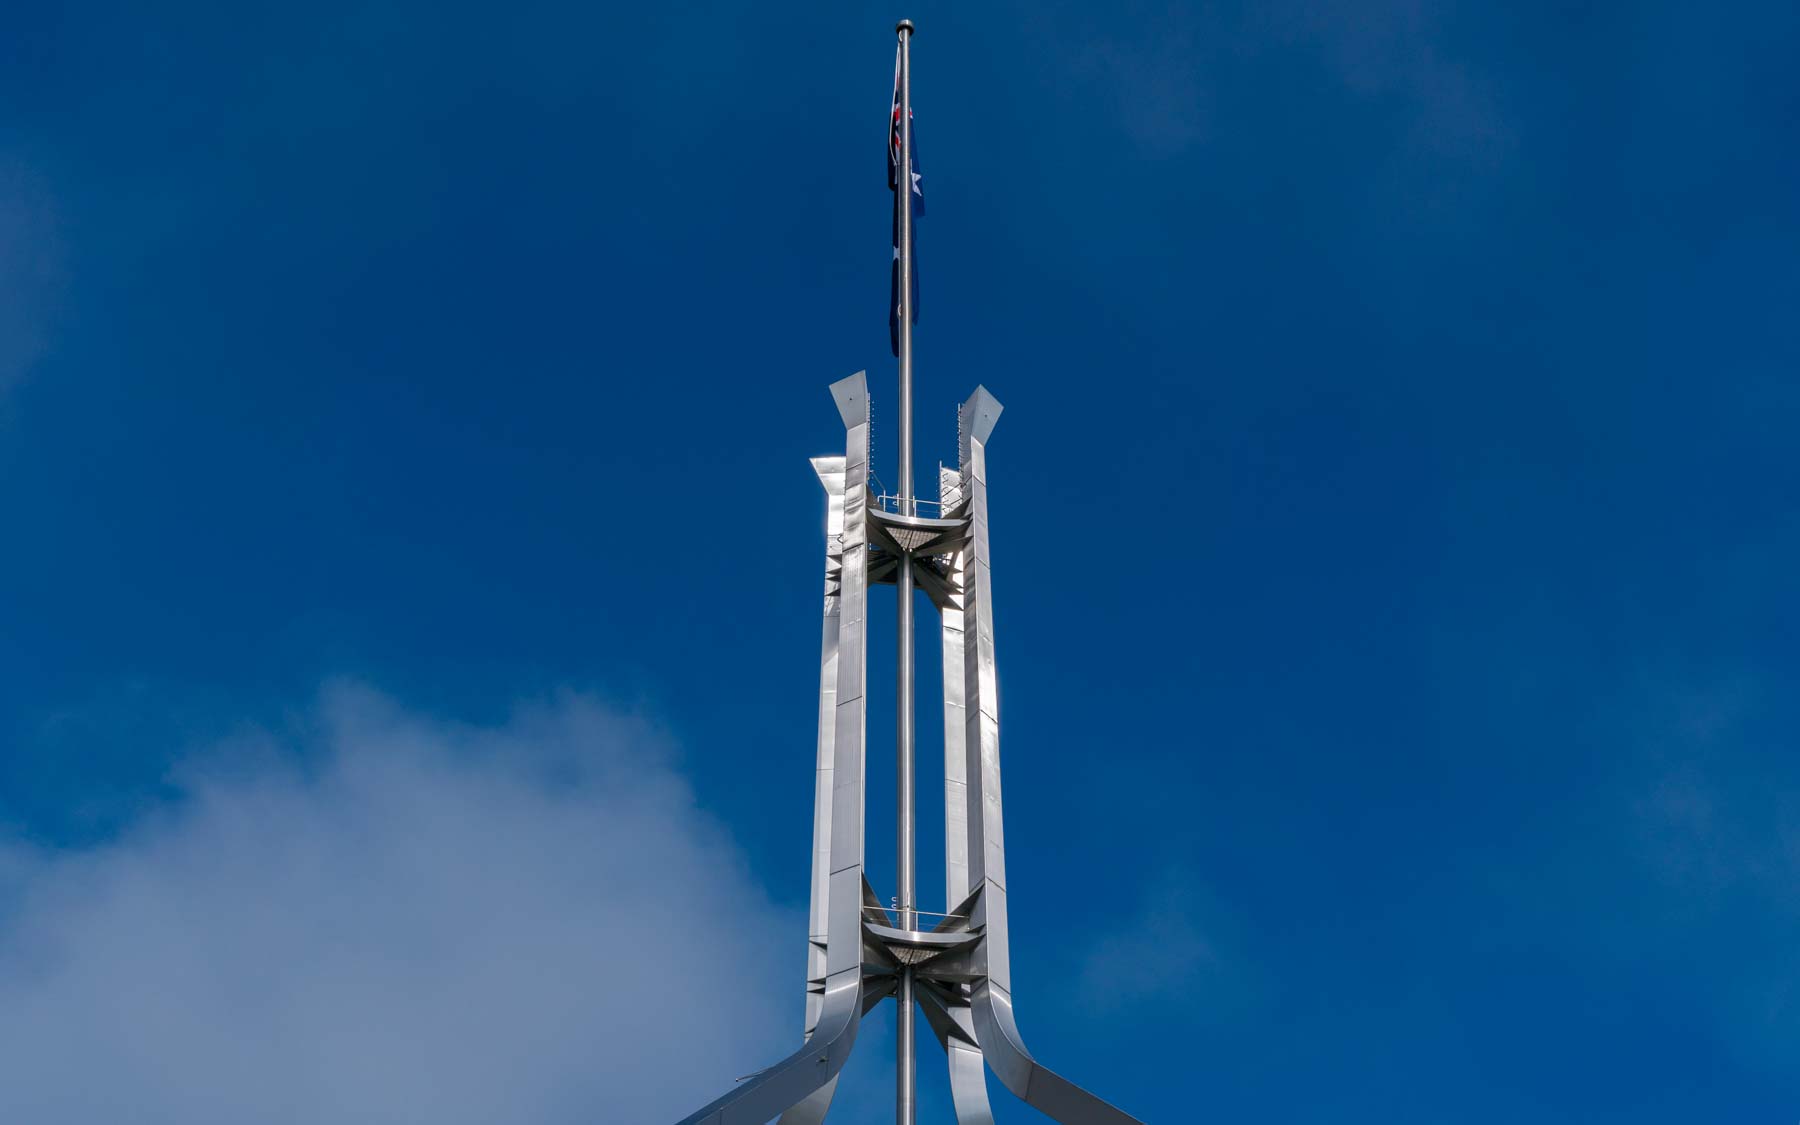 The flag pole on parliament roof.